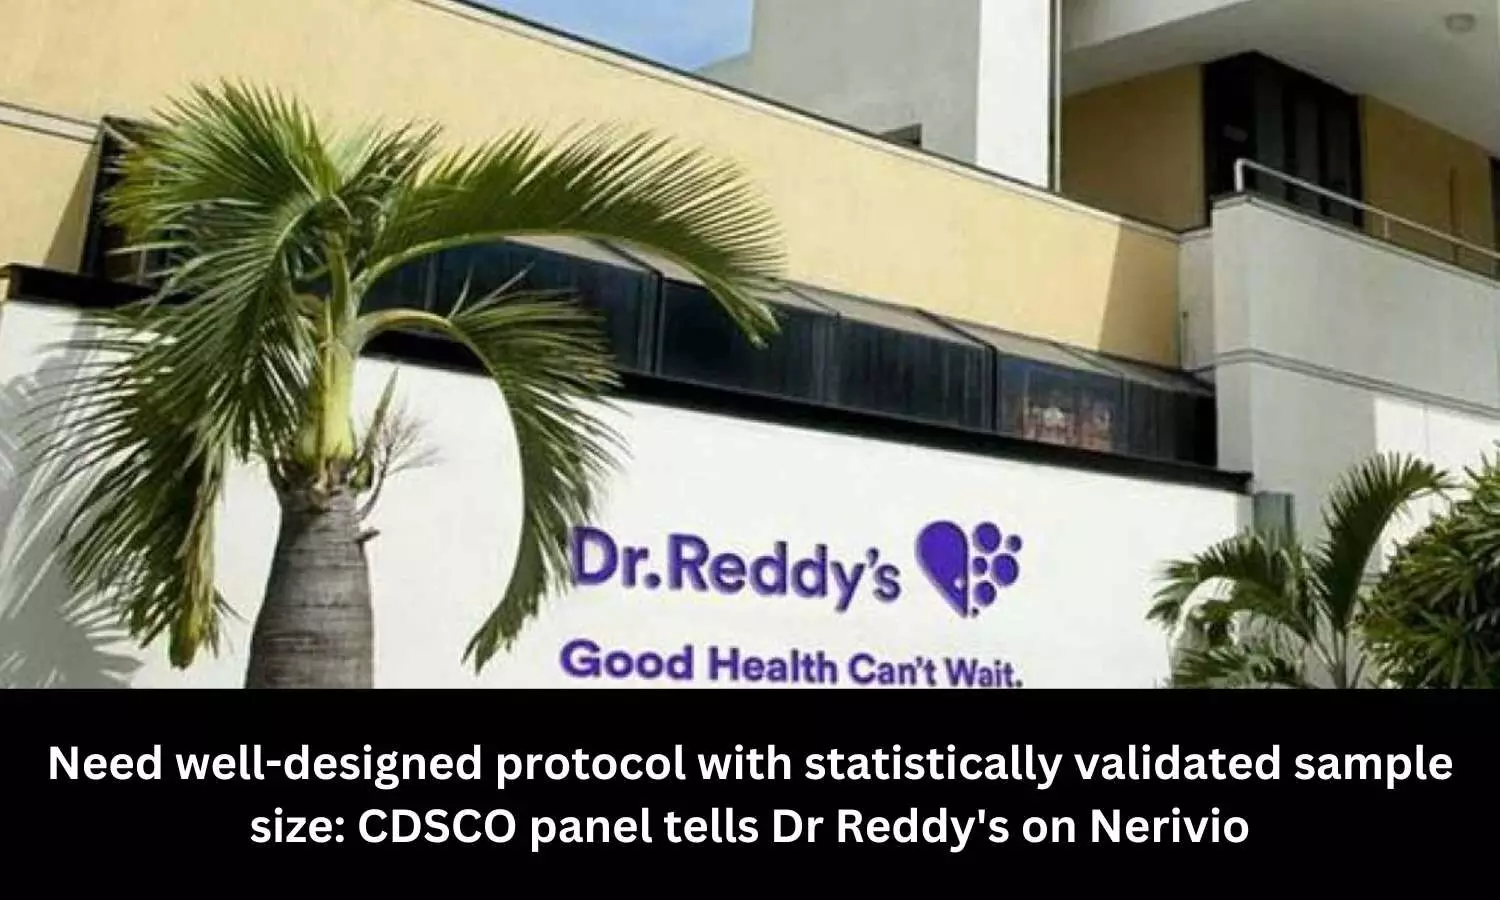 Need well-designed protocol with statistically validated sample size: CDSCO panel tells Dr Reddys Labs on Nerivio